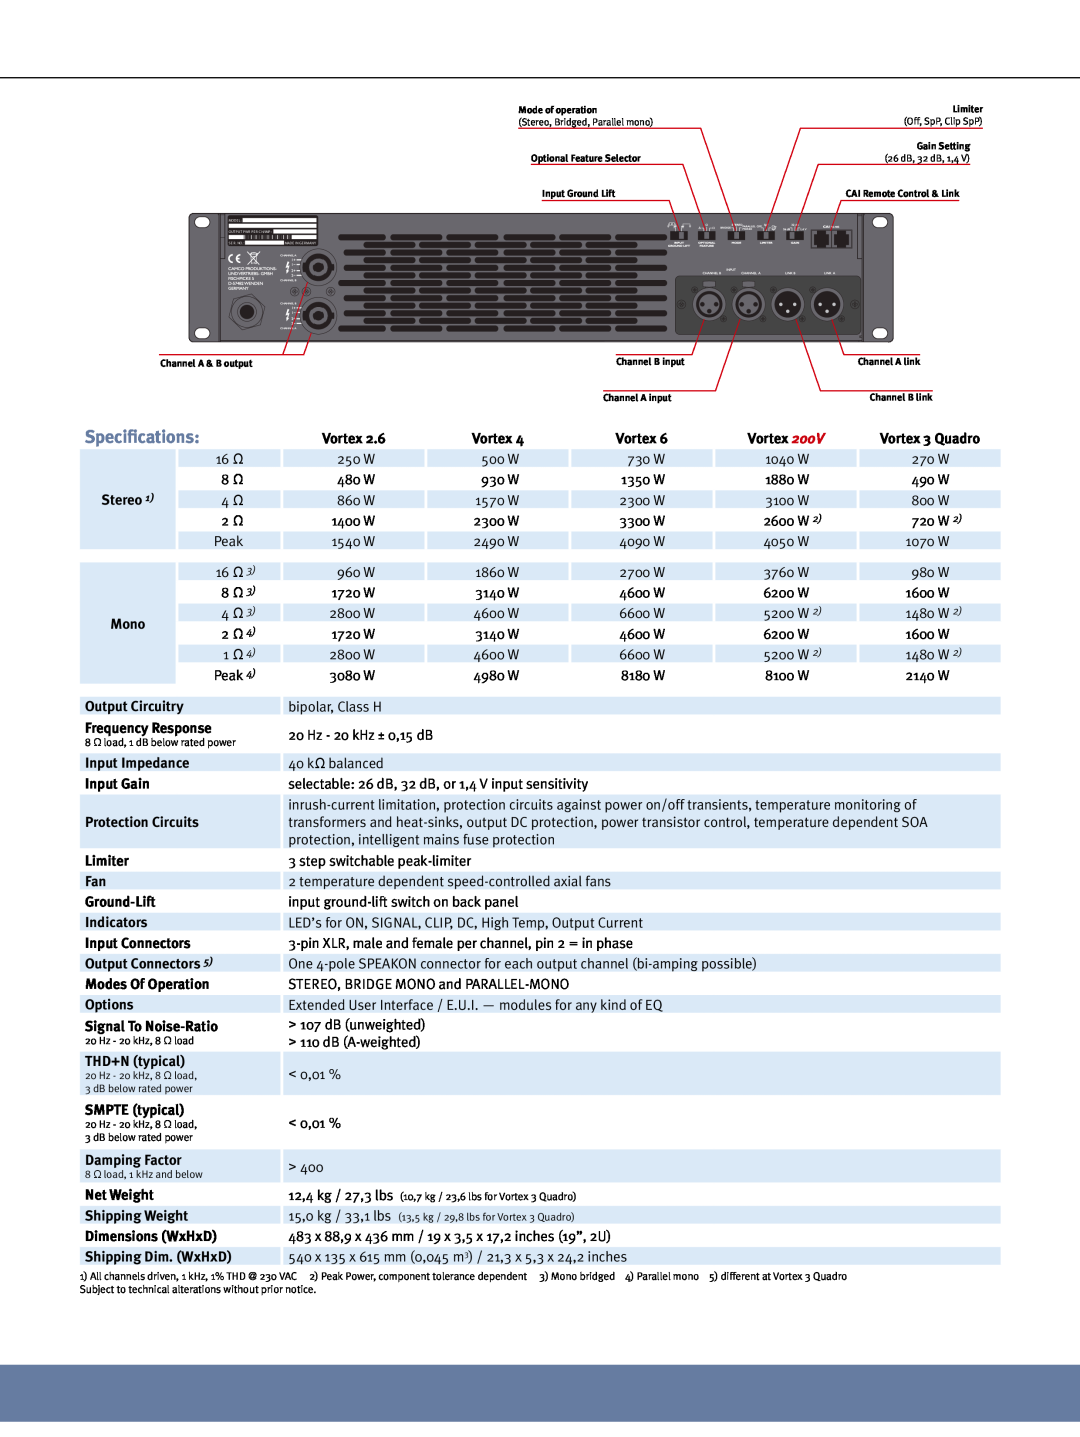 Camco Amplifier manual Specifications 